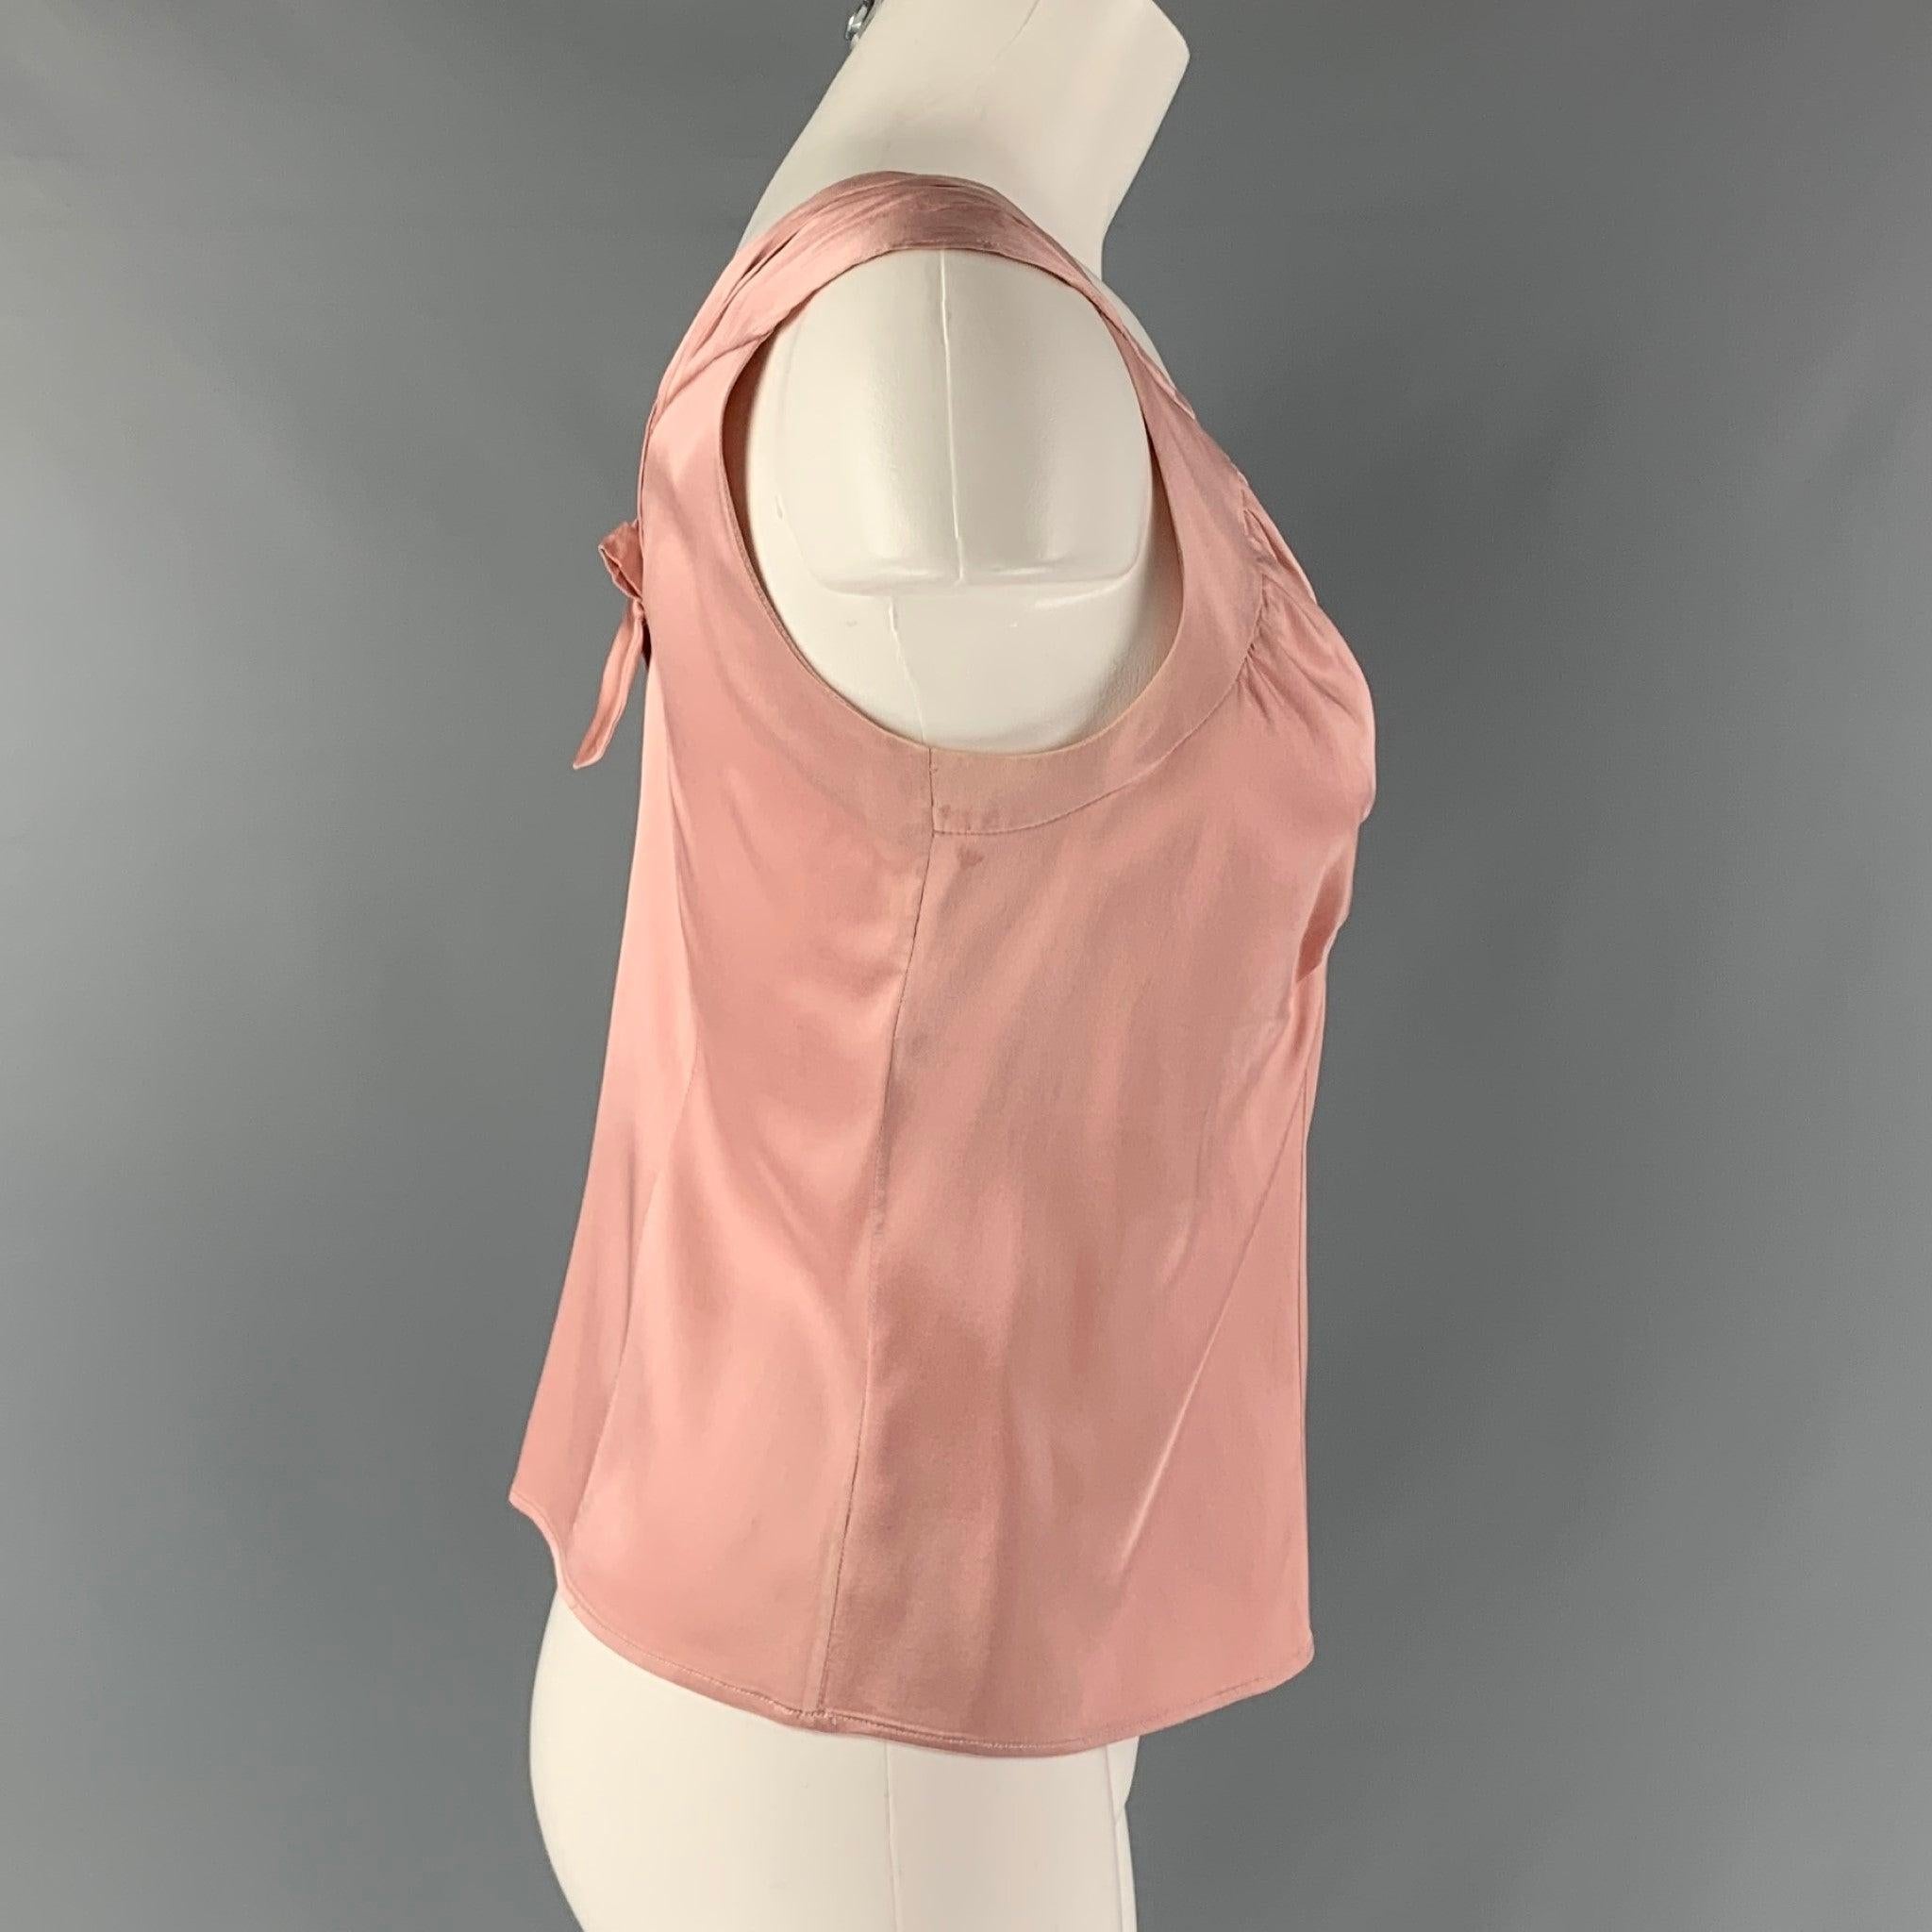 MARNI top comes in a pink silk and elastane sateen fabric featuring a V-neck and a bow detail at center back. Made in Italy. Very Good Pre-Owned Condition. Minor discoloration under the shoulder.  

Marked:   40 

Measurements: 
 
Shoulder: 15